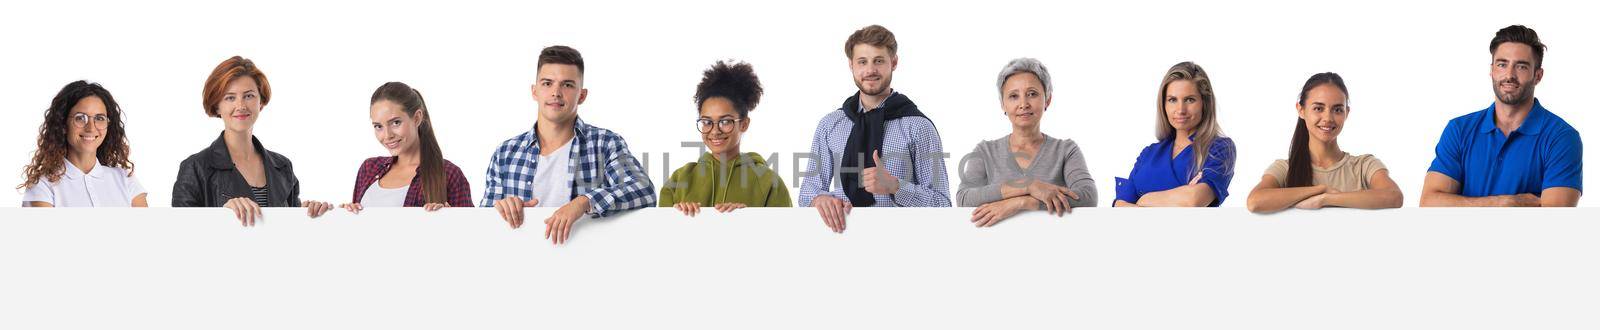 Group of people in casual clothes holding blank banner ad sign isolated on white background